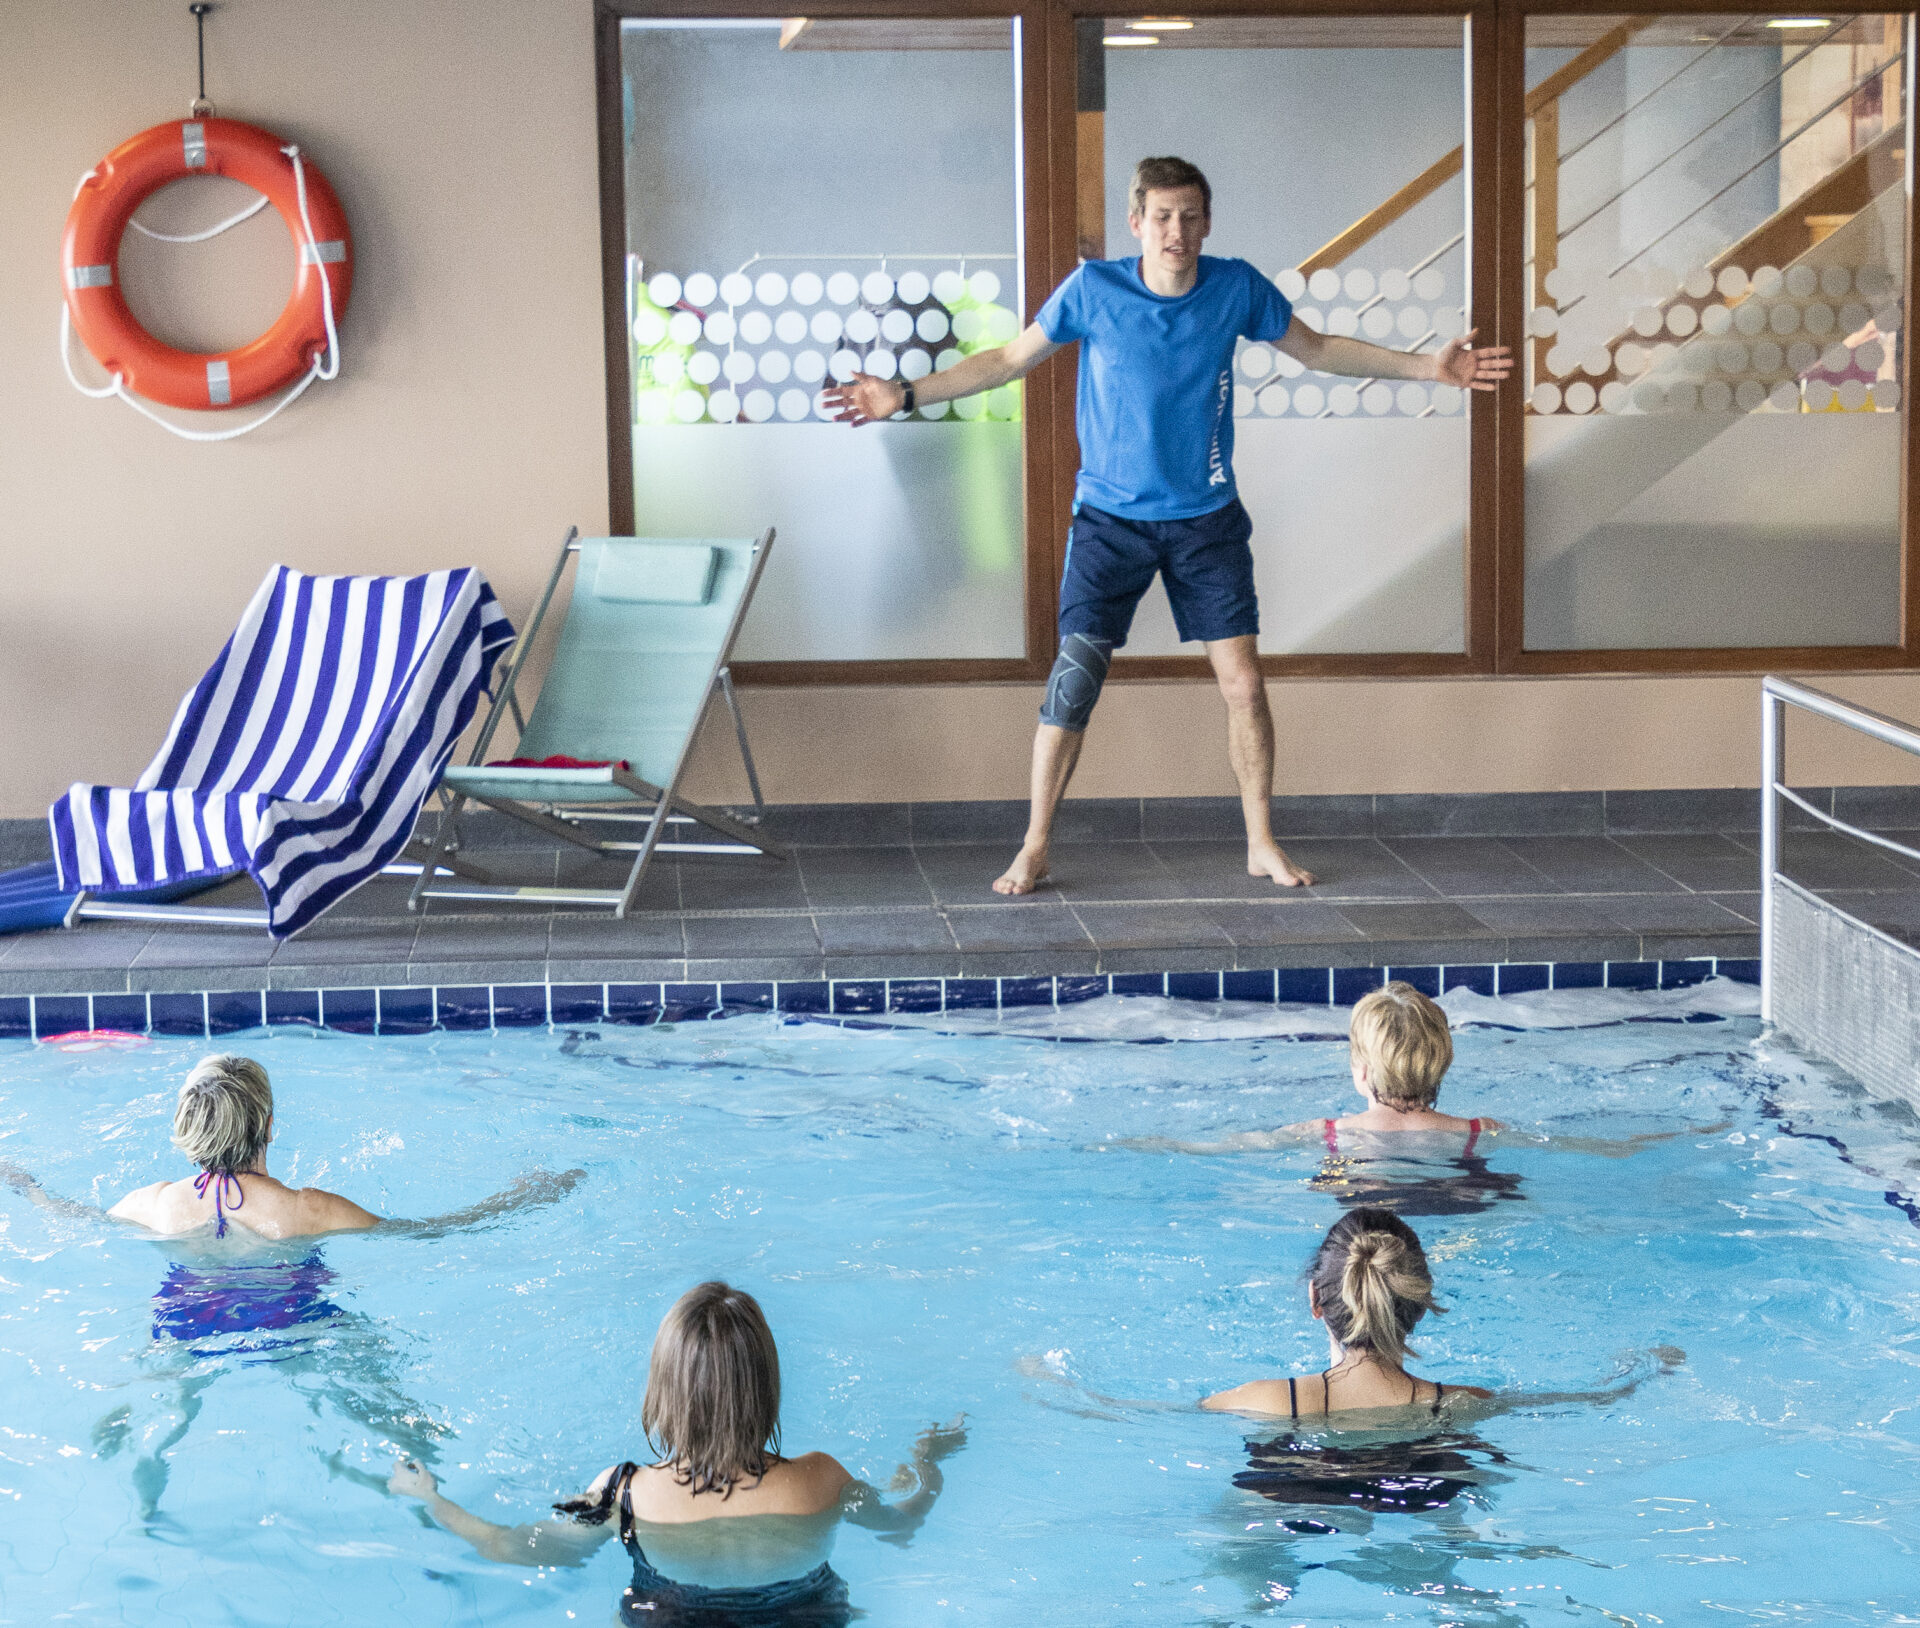 An image of one of the fitness sessions in the pool